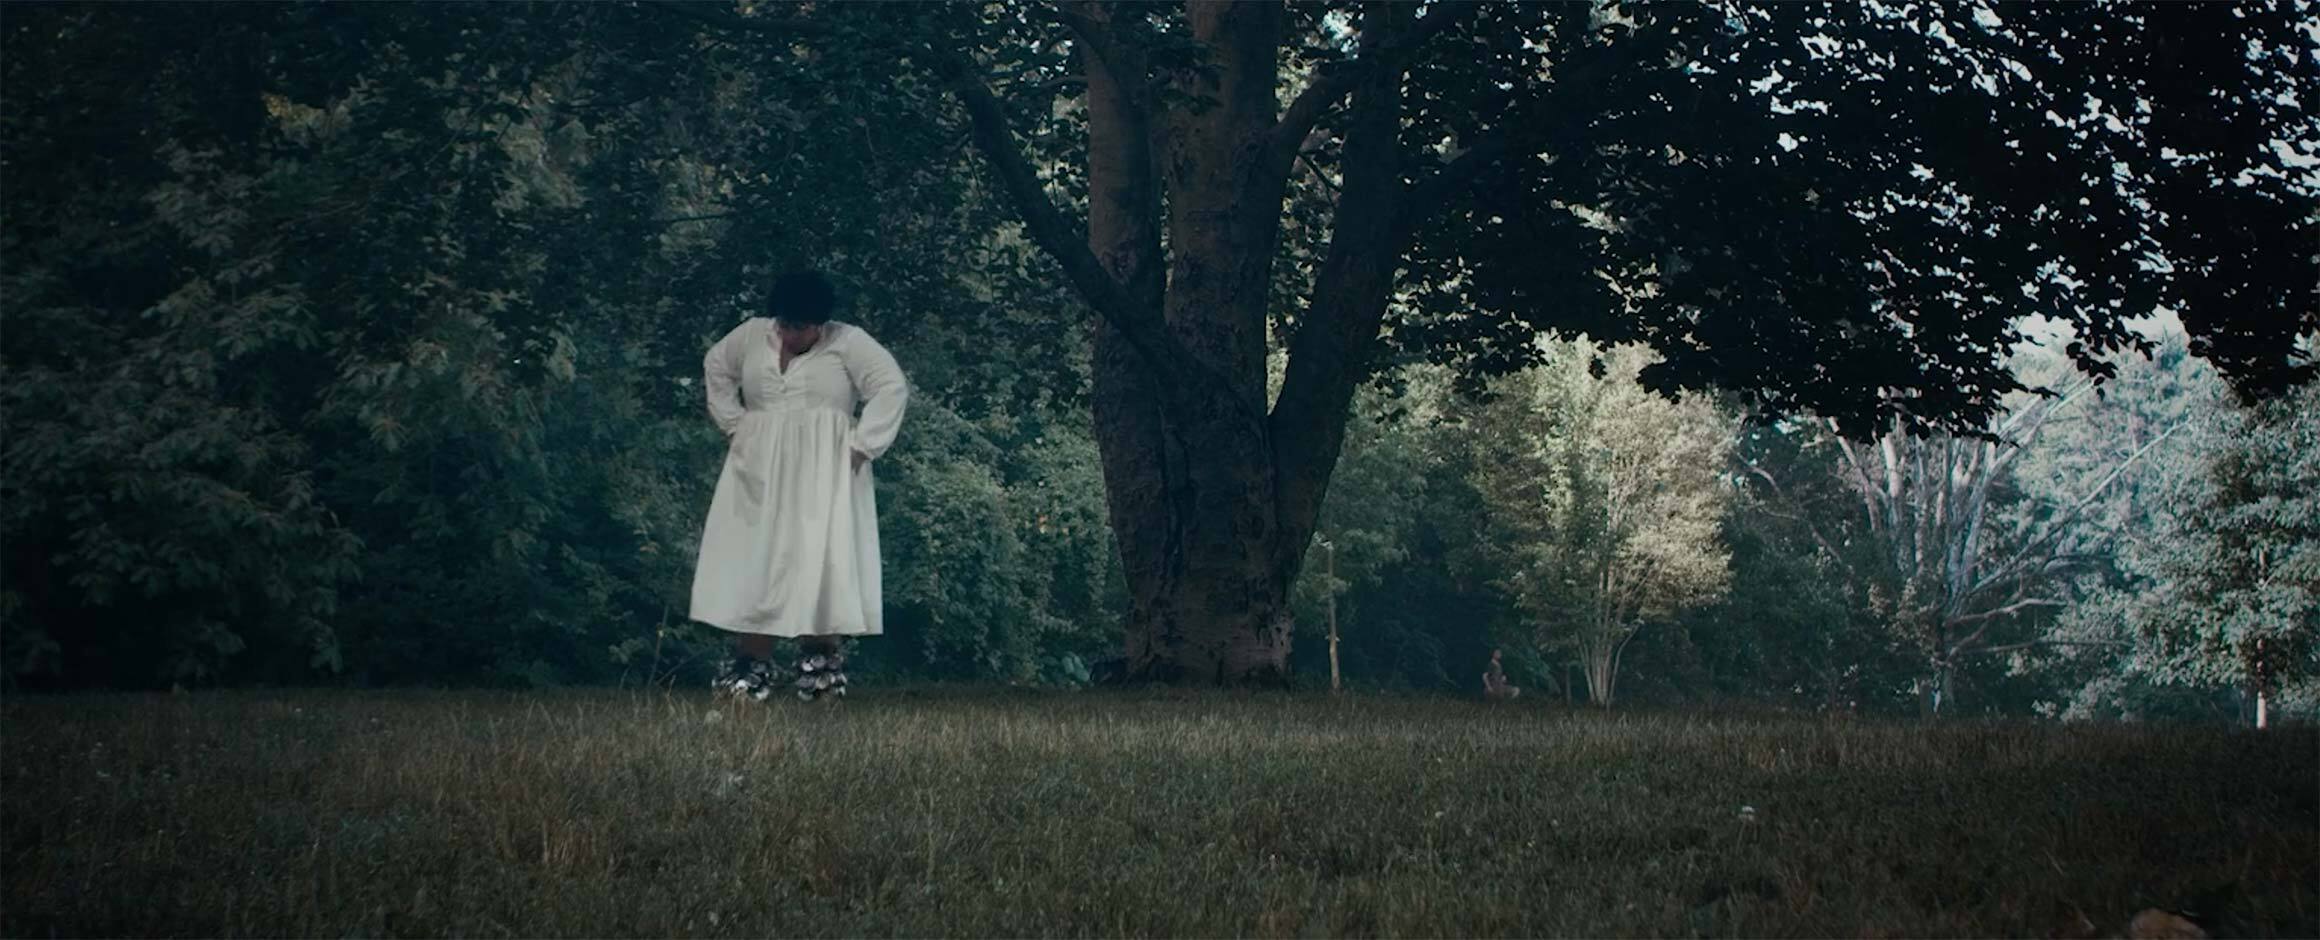 Film still from Rashida Bumbray’s film titled “Braiding and Singing (a point)”; in the film still, Rashida Bumbray wears a white dress, standing in the grass under a large tree in Prospect Park.